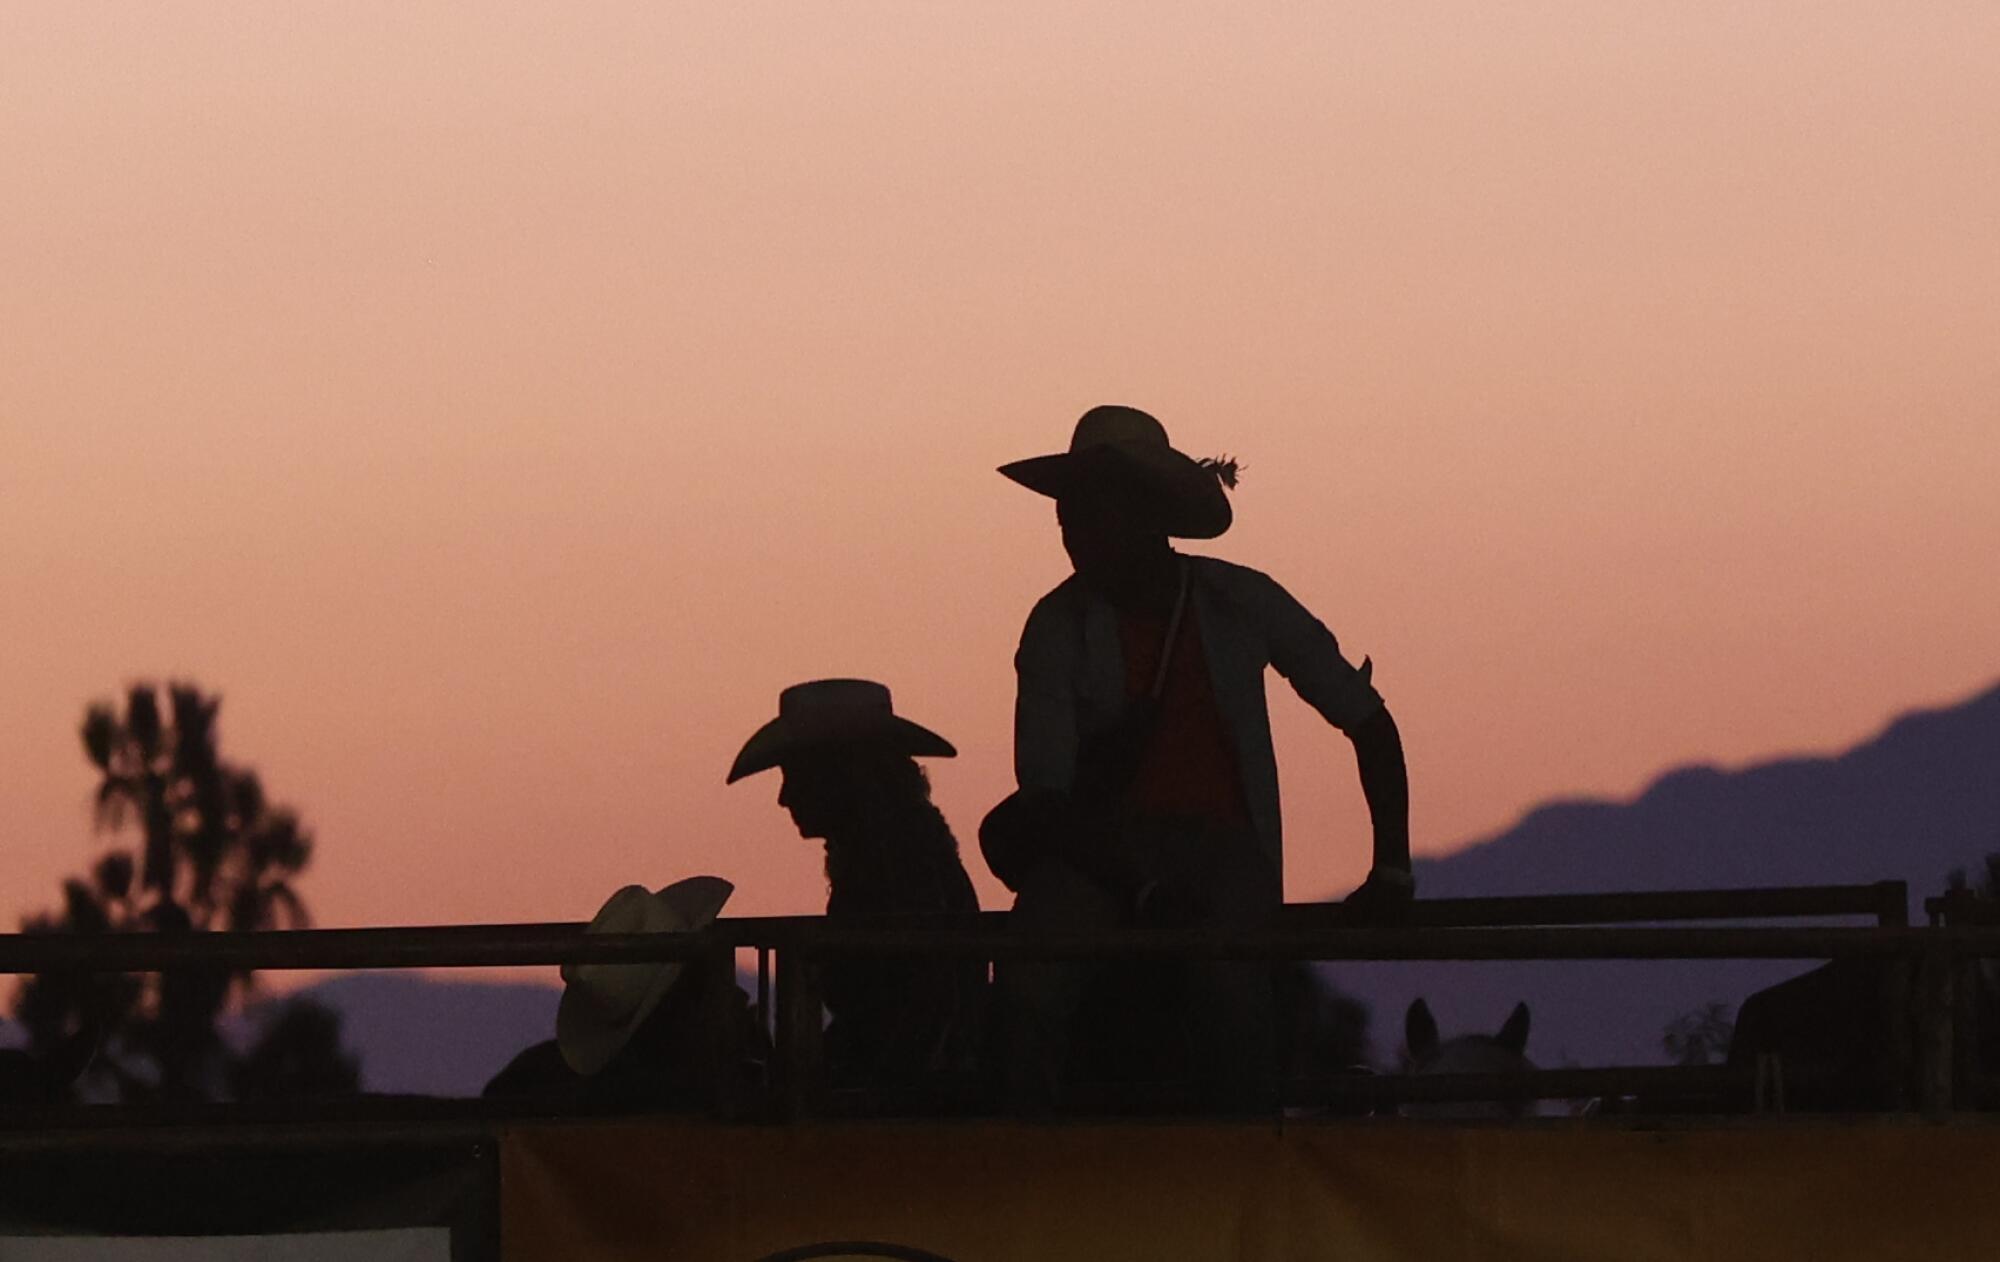 People in cowboy hats are silhouetted against a dusty sky.